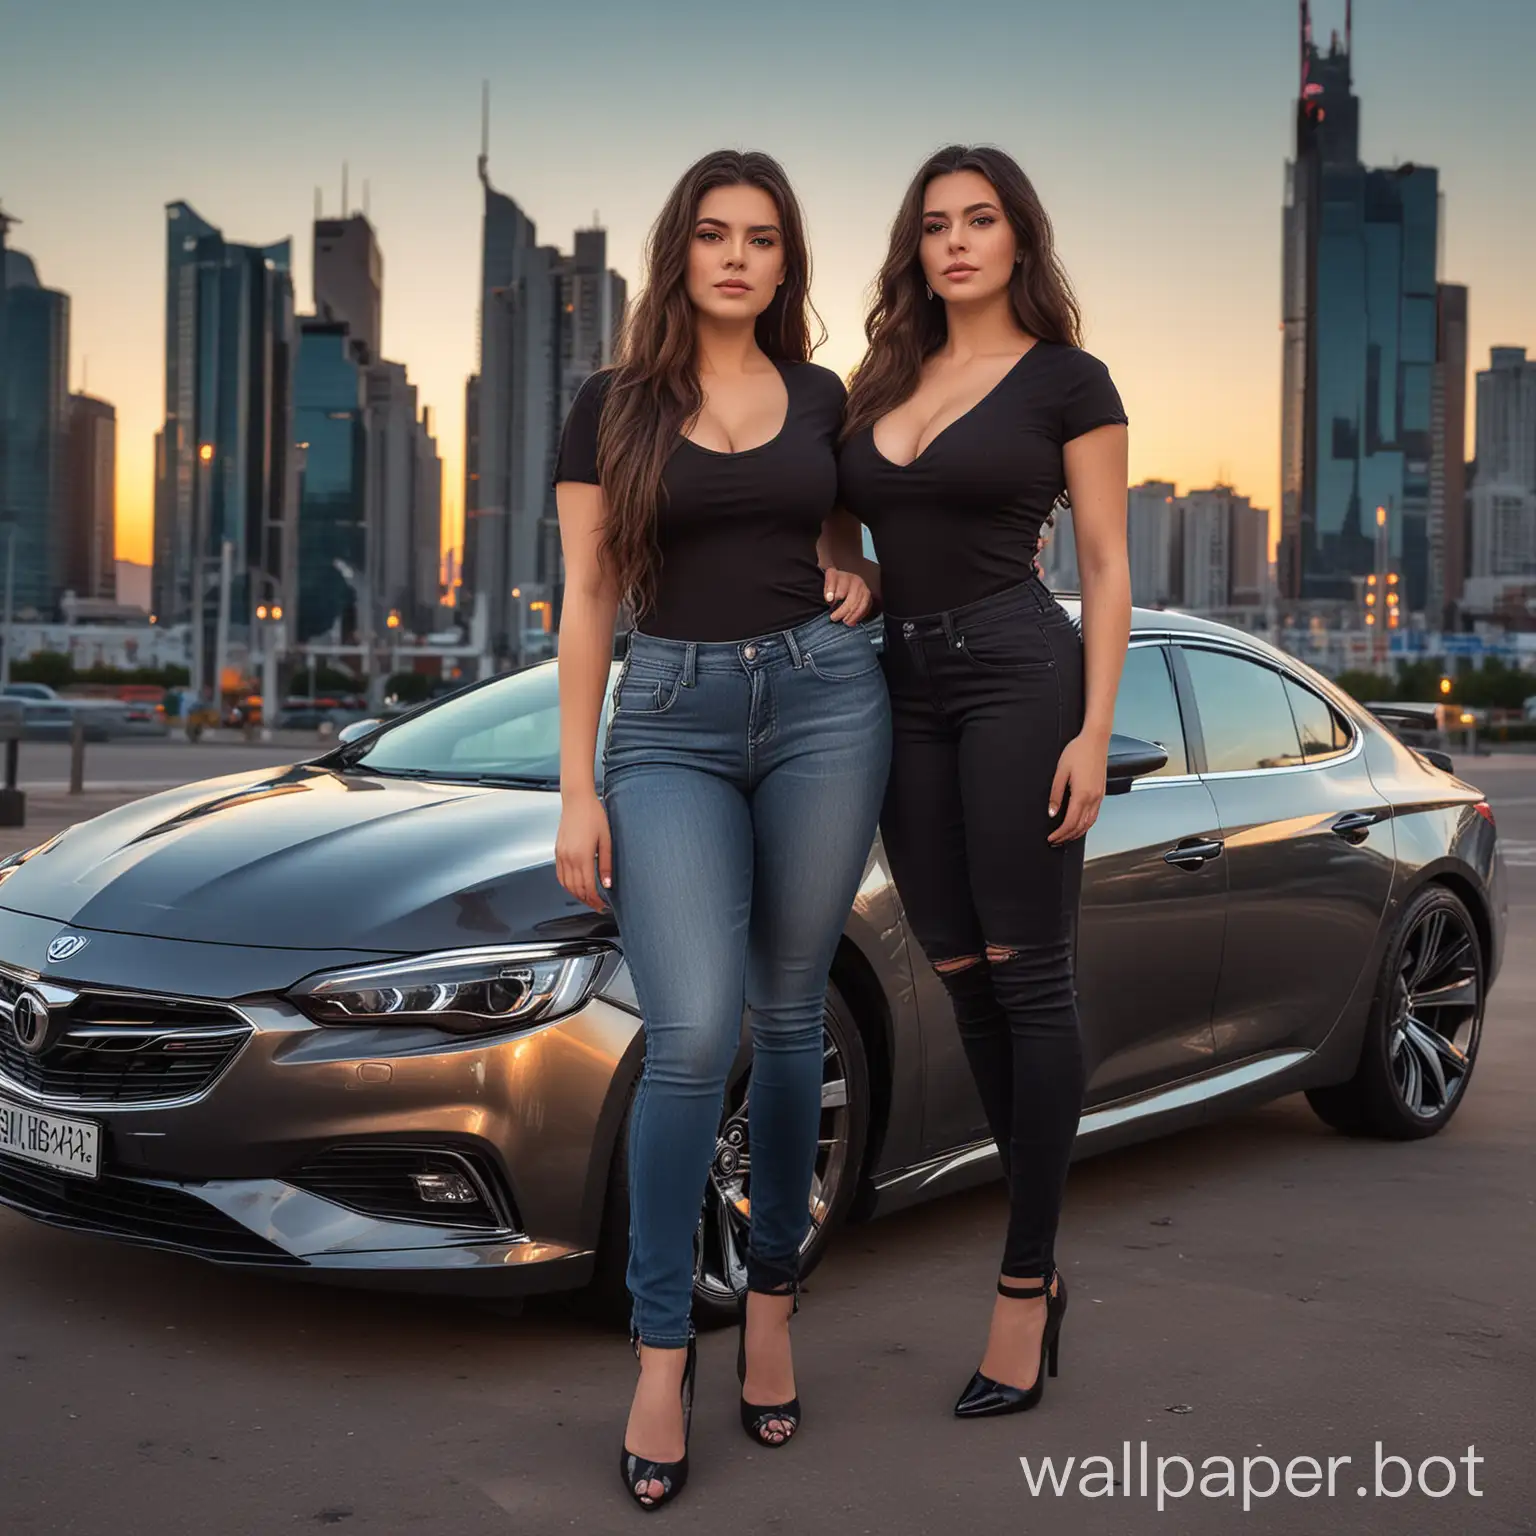 fuller, curvy shaped woman visible from the back. She has long darkbrown hair (her face isn't visible), wearing black t-shirt with cleavage, jeans and high heels standing near of grey opel insignia grandsport. The car is visible from the front and is standing next to the woman. The background is a futuristic city at sunset, synthwave style